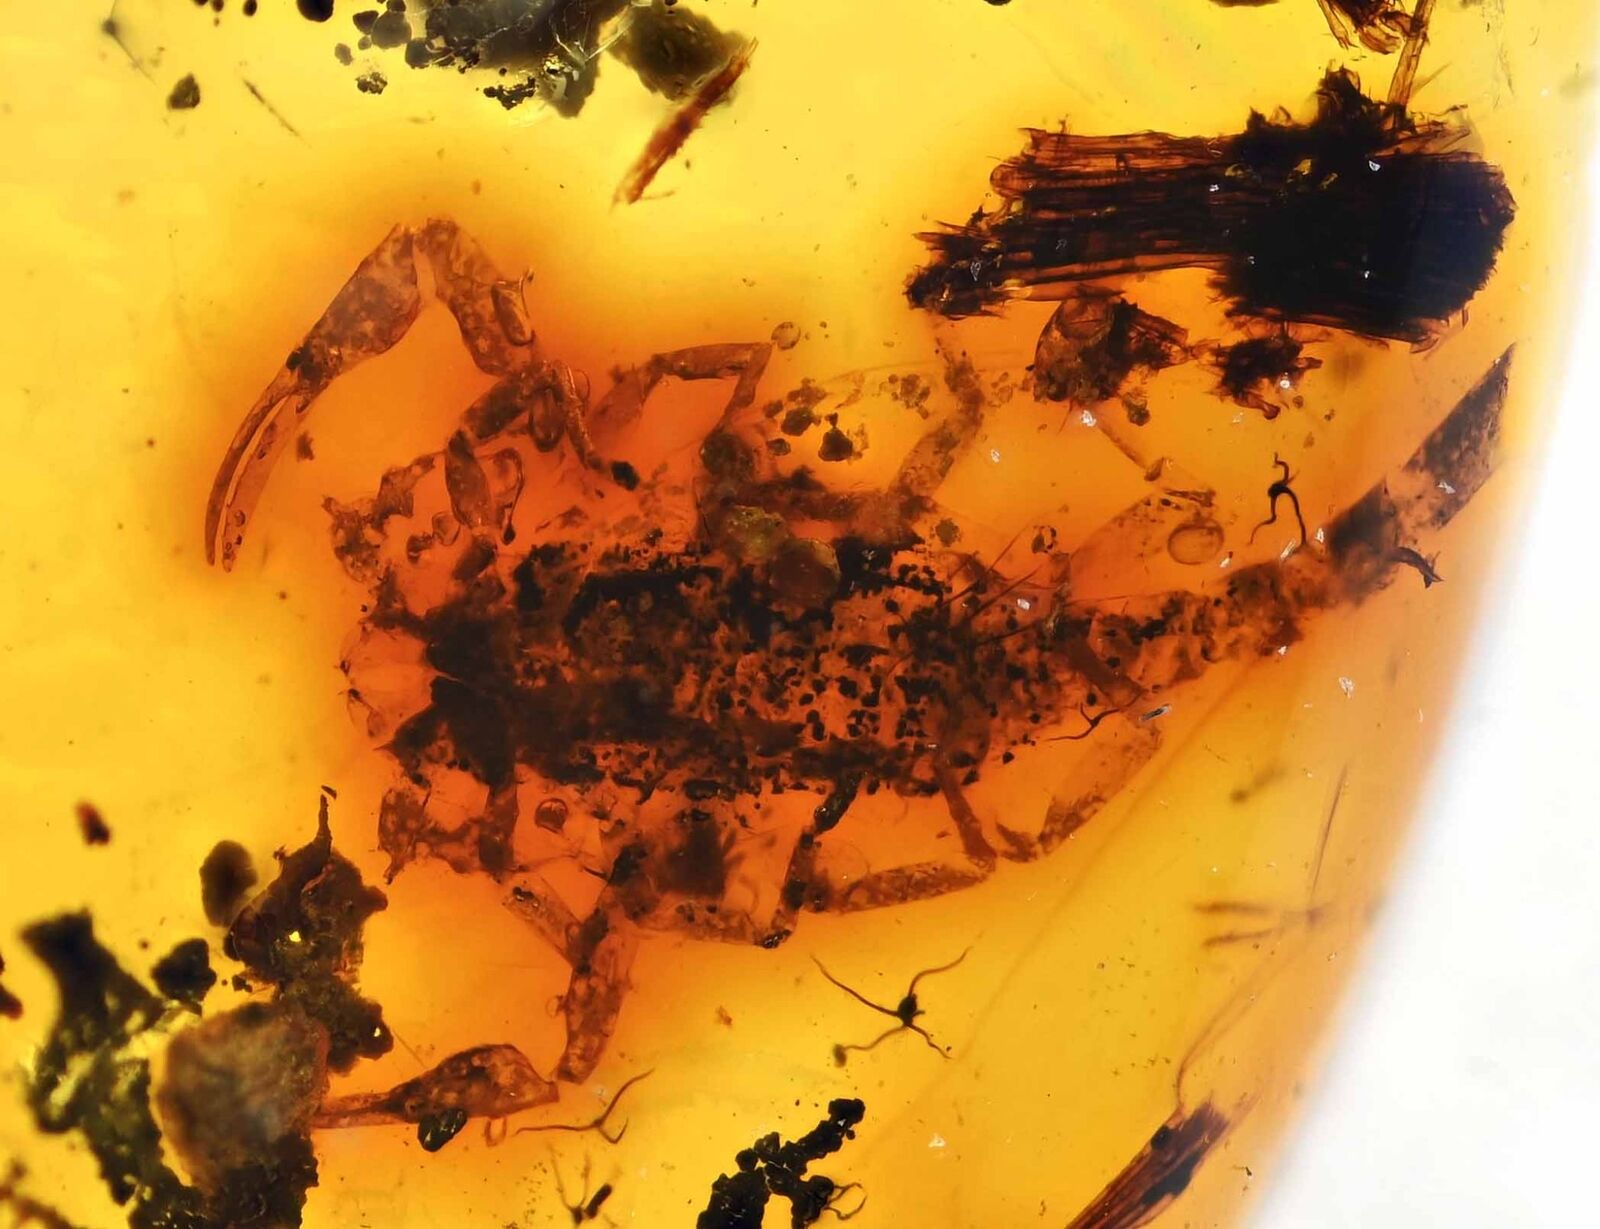 Rare nearly complete Scorpion, Fossil Insect inclusion in Burmese Amber